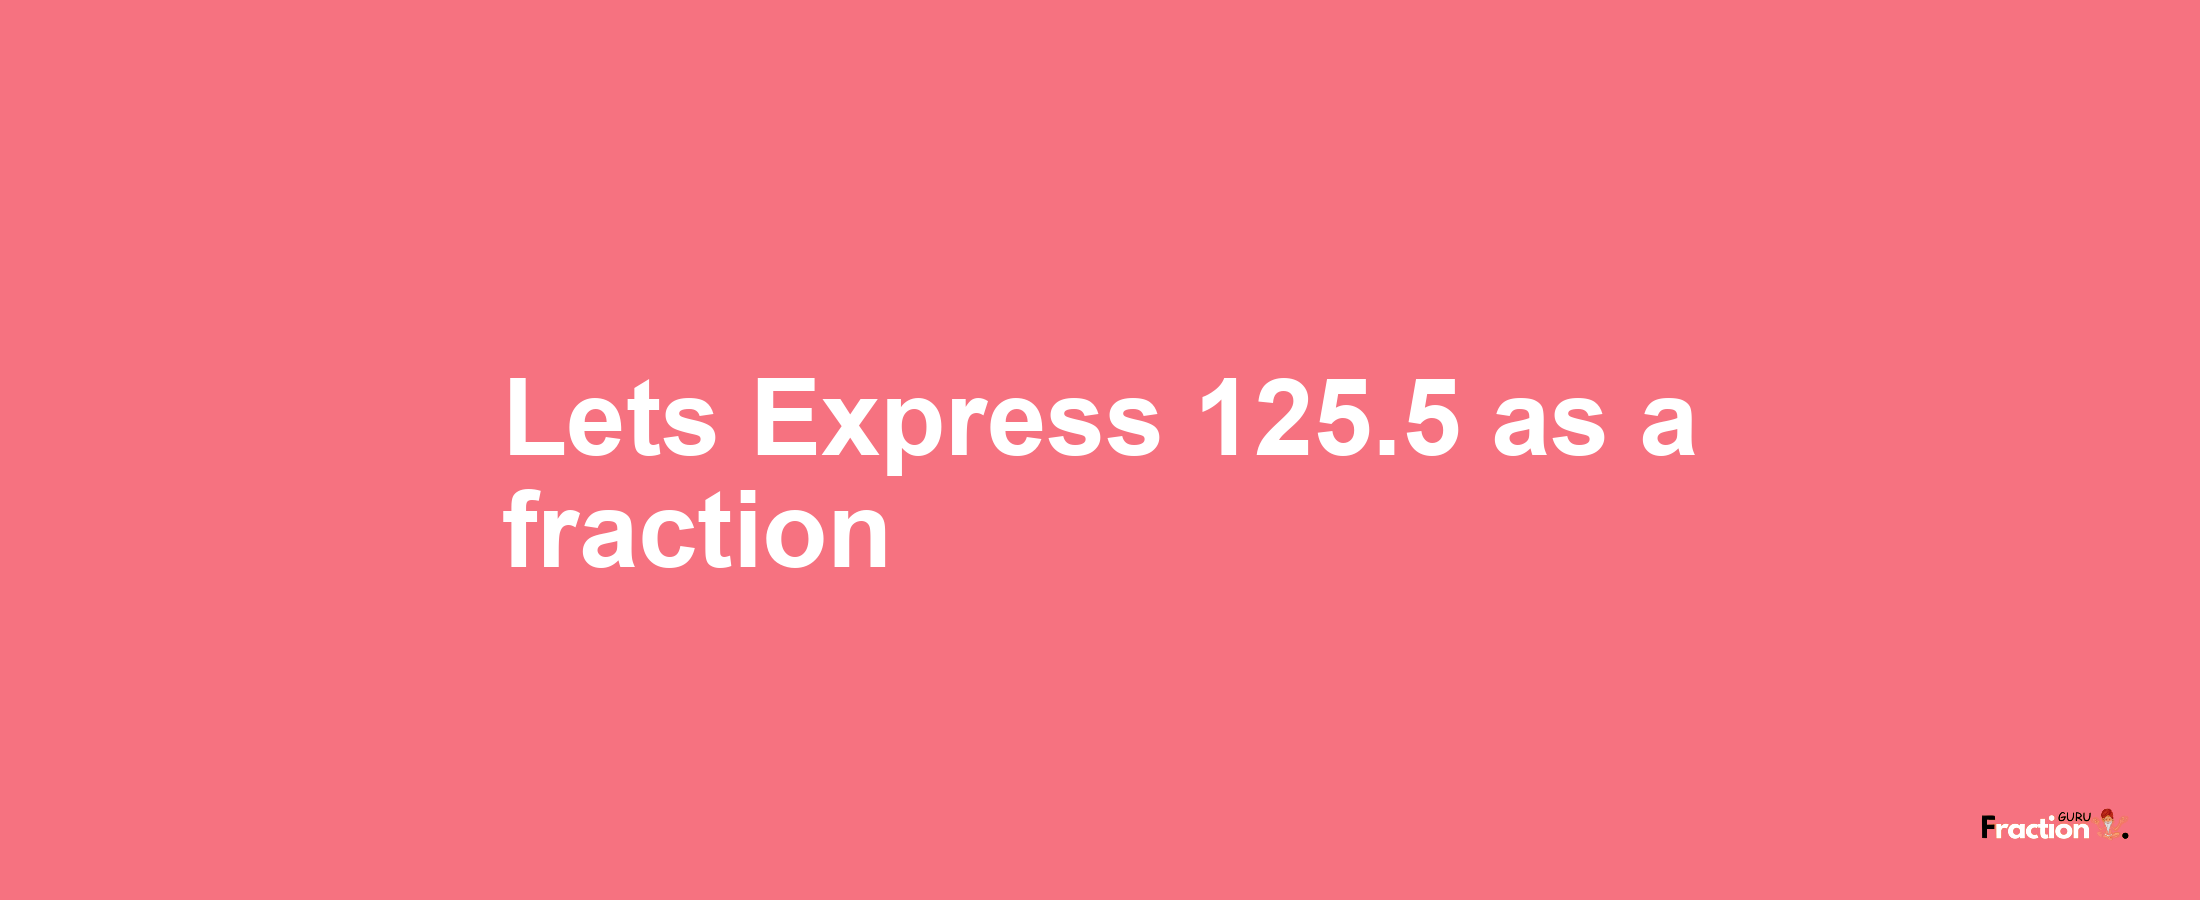 Lets Express 125.5 as afraction